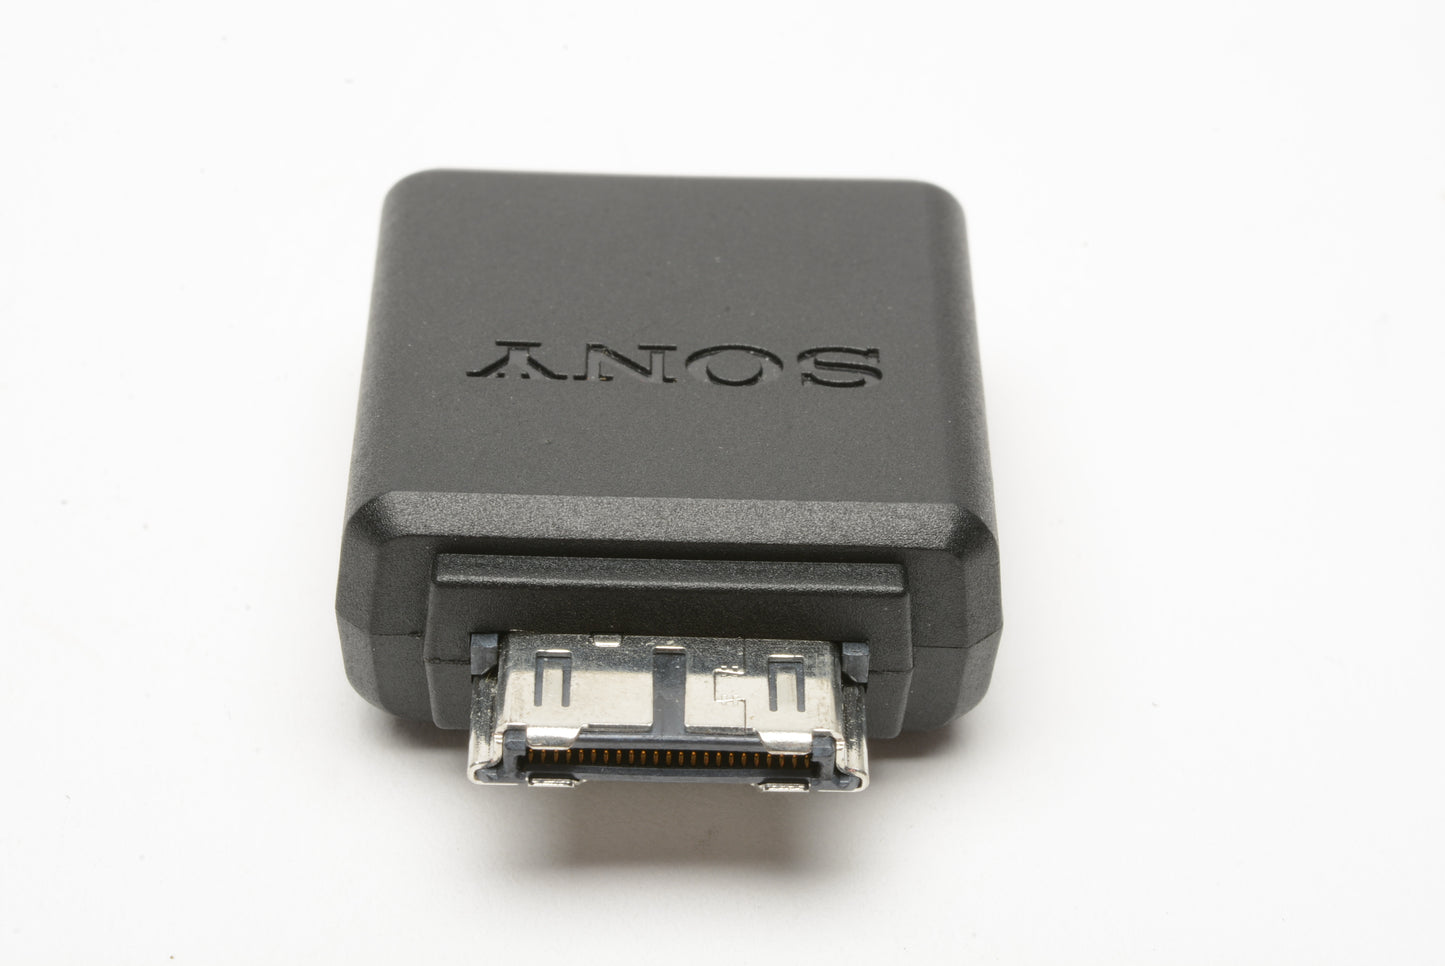 Sony Type 2 HDMI Adapter